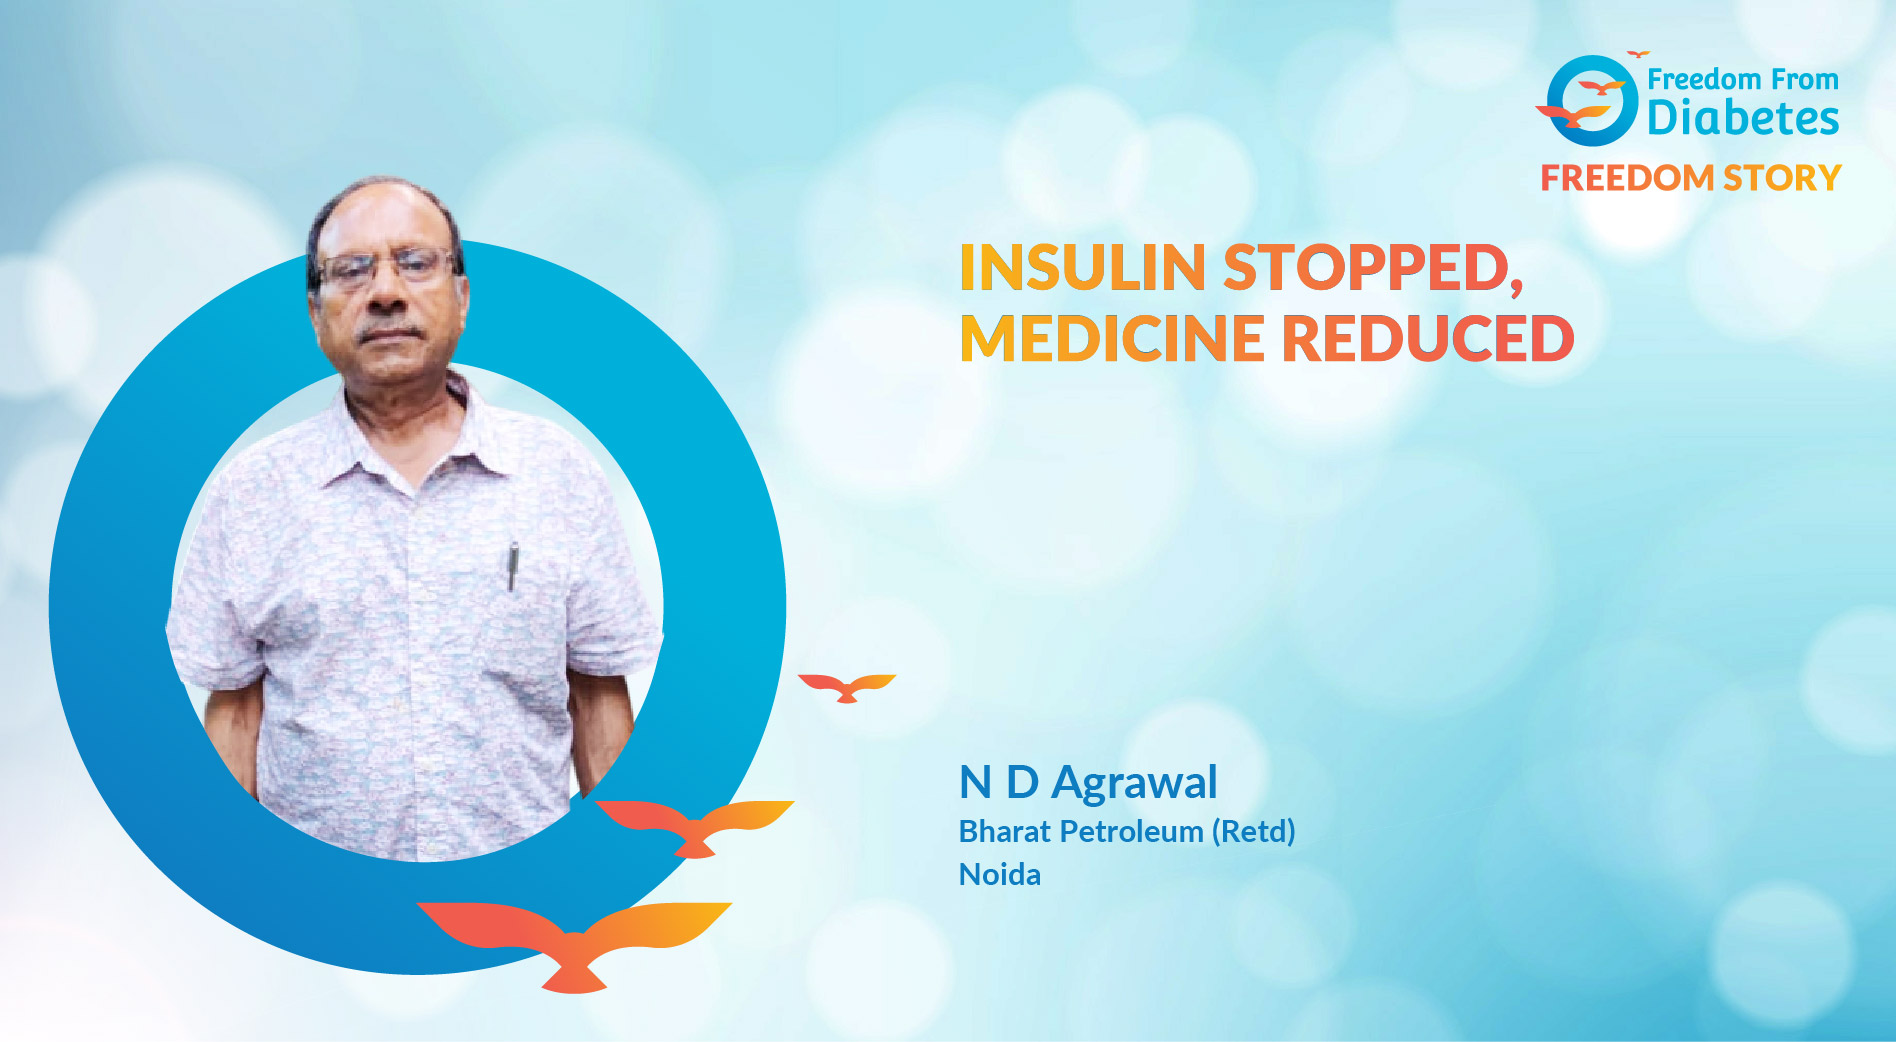 N D Agrawal: An Inspirational story of insulin reversal